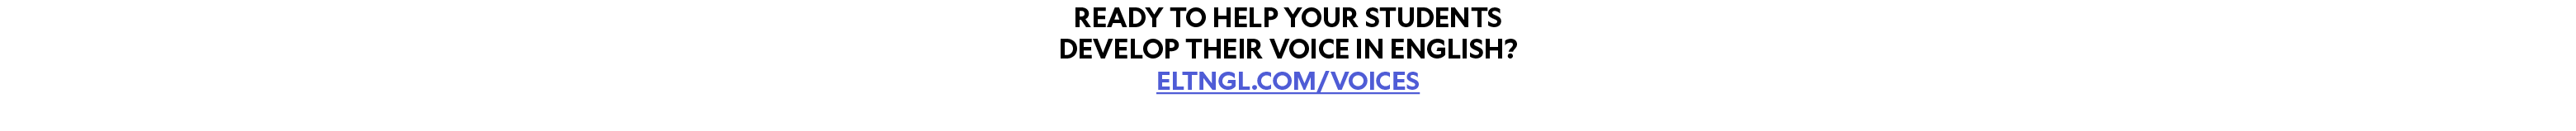 Ready to help your students develop their voice in English? ELTngl.com/voices